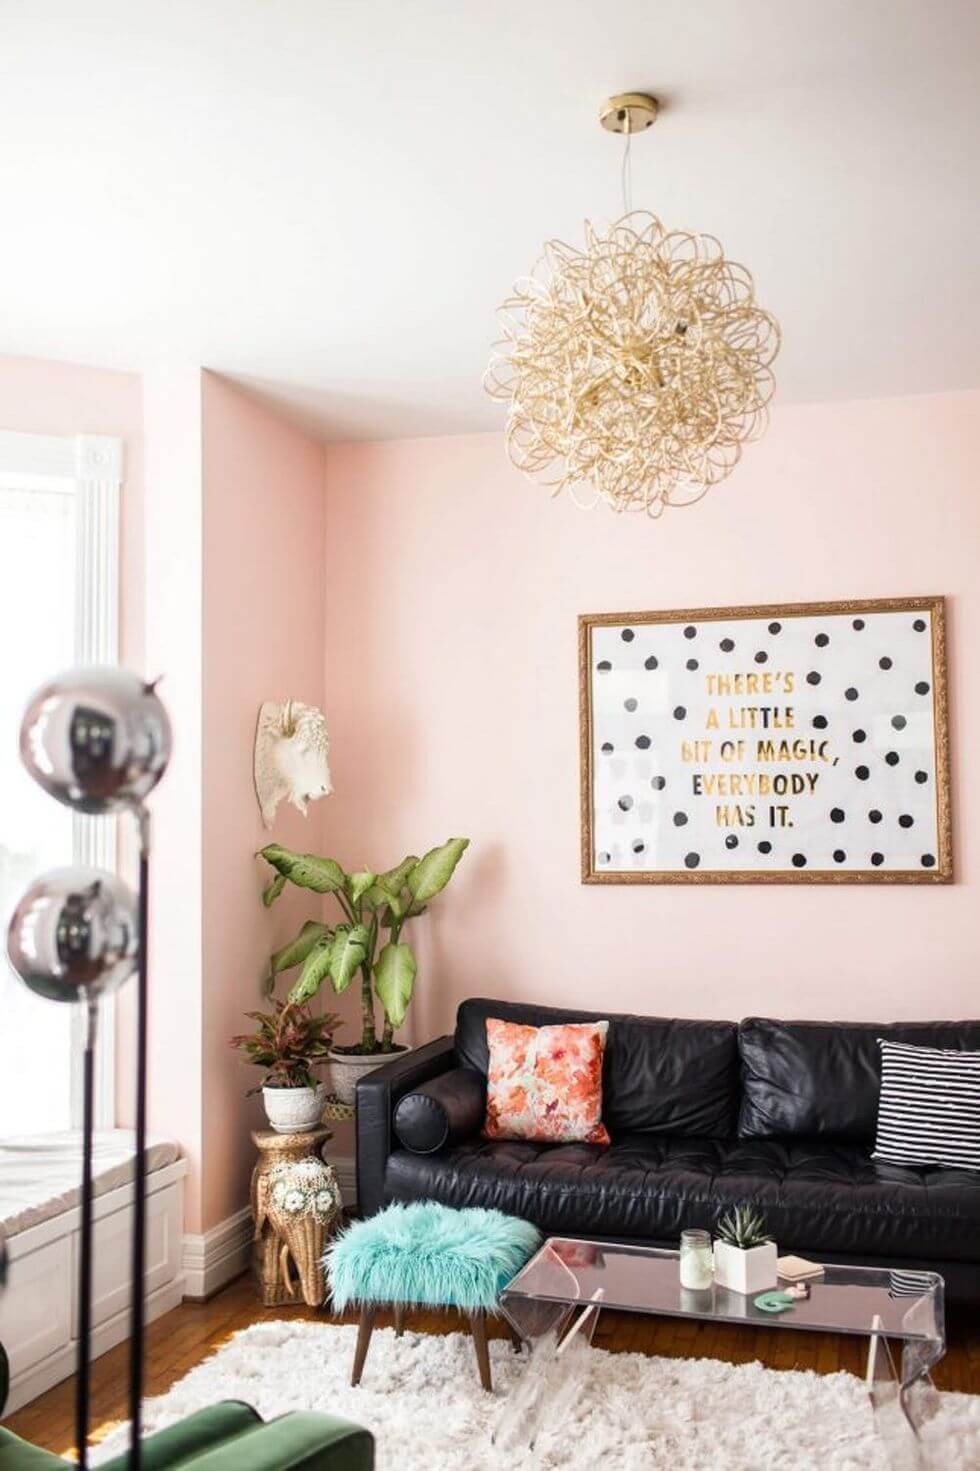 Light colors to make the room bigger (1)